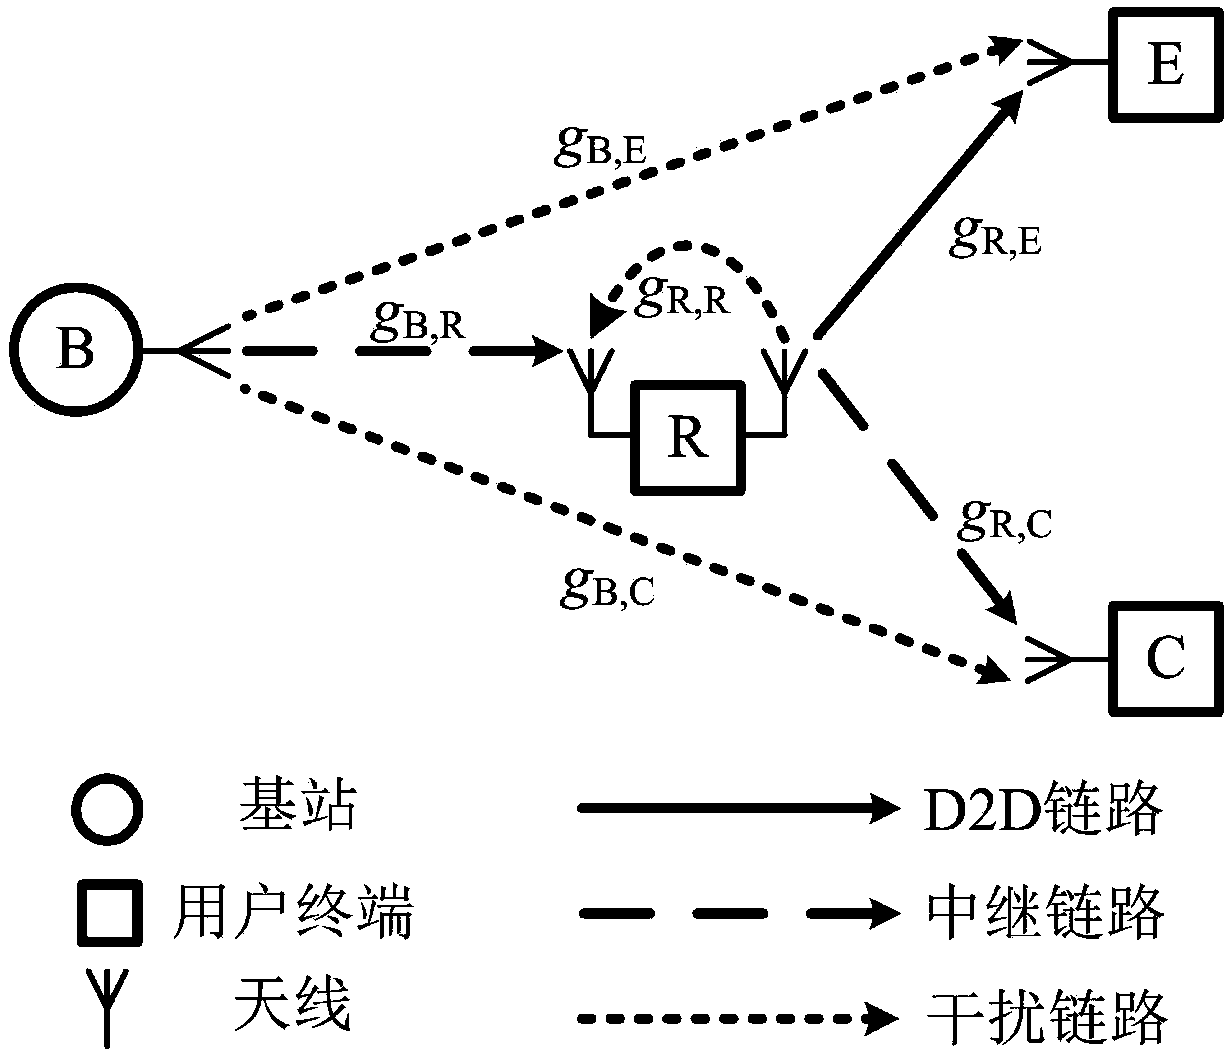 Power control method embedded into D2D cellular network and based on full-duplex relay